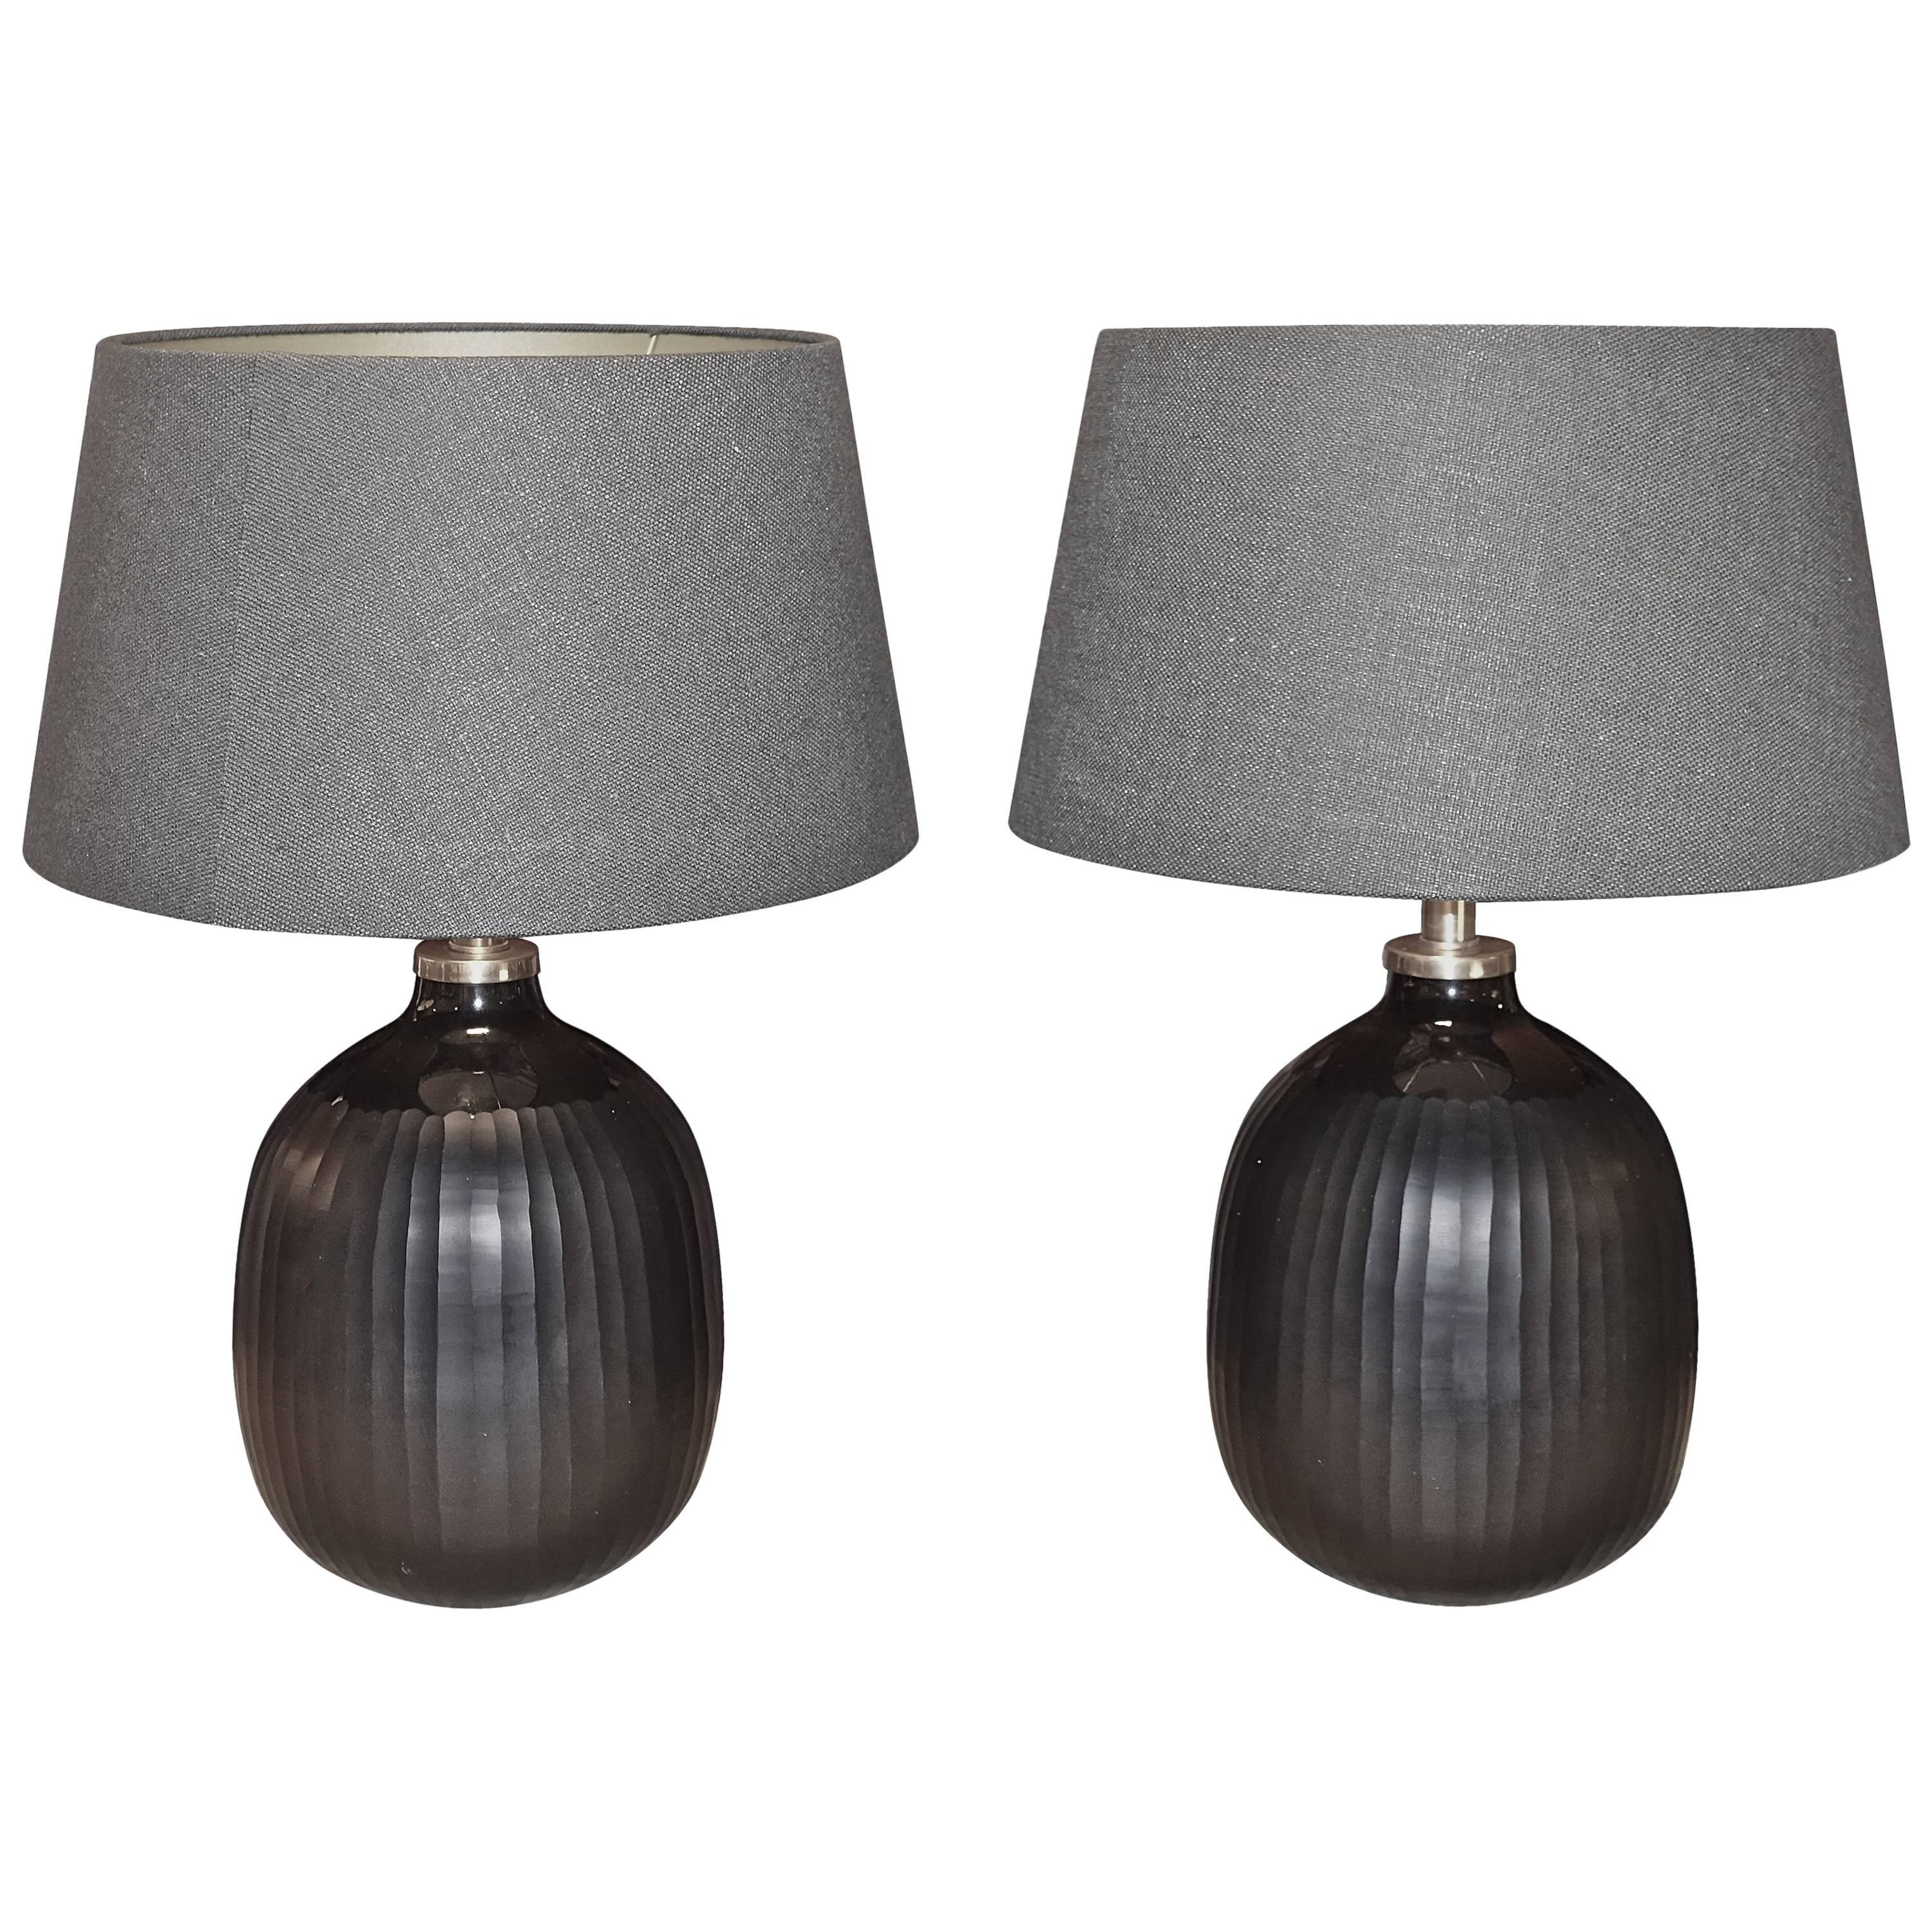 Pair of Black Glass Lamps, China, Contemporary